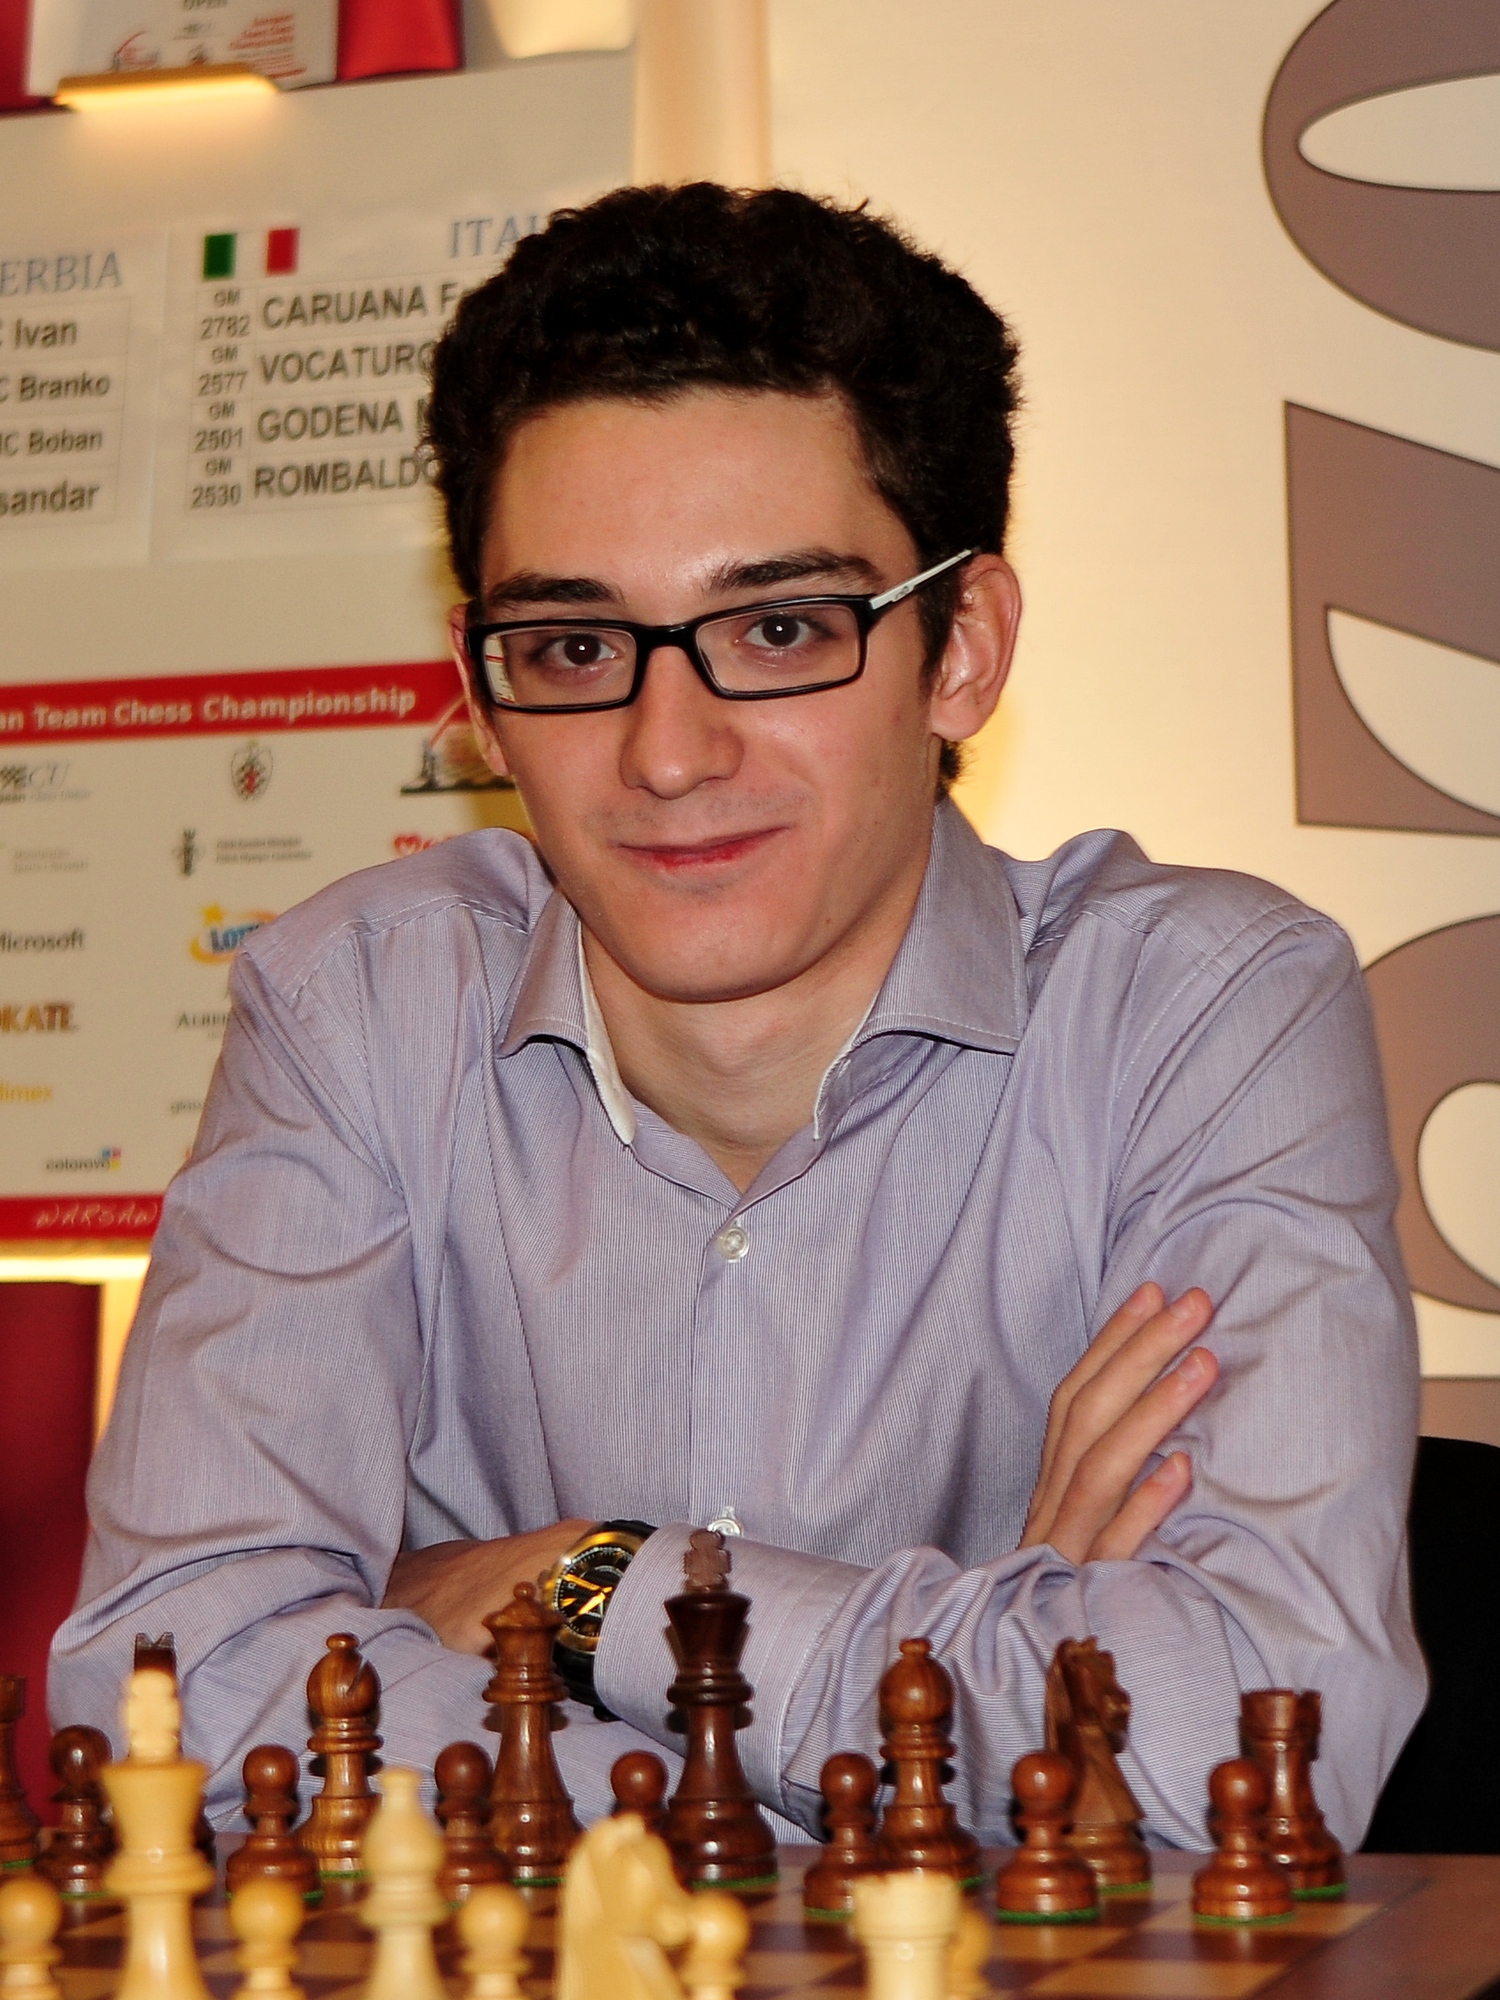 best chess player in the world